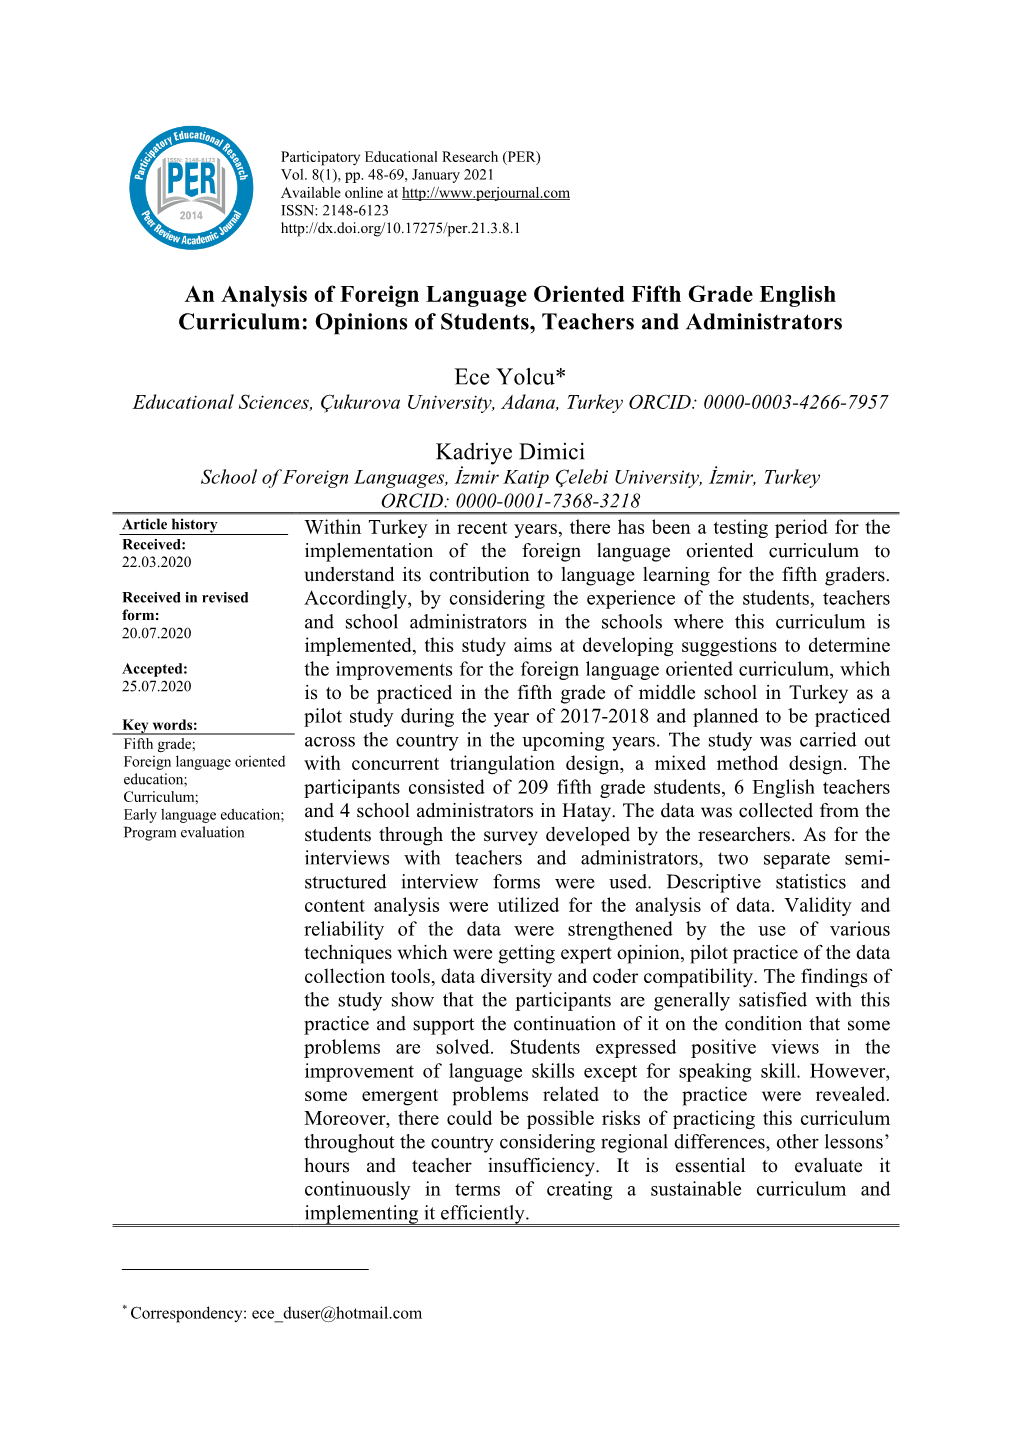 An Analysis of Foreign Language Oriented Fifth Grade English Curriculum: Opinions of Students, Teachers and Administrators